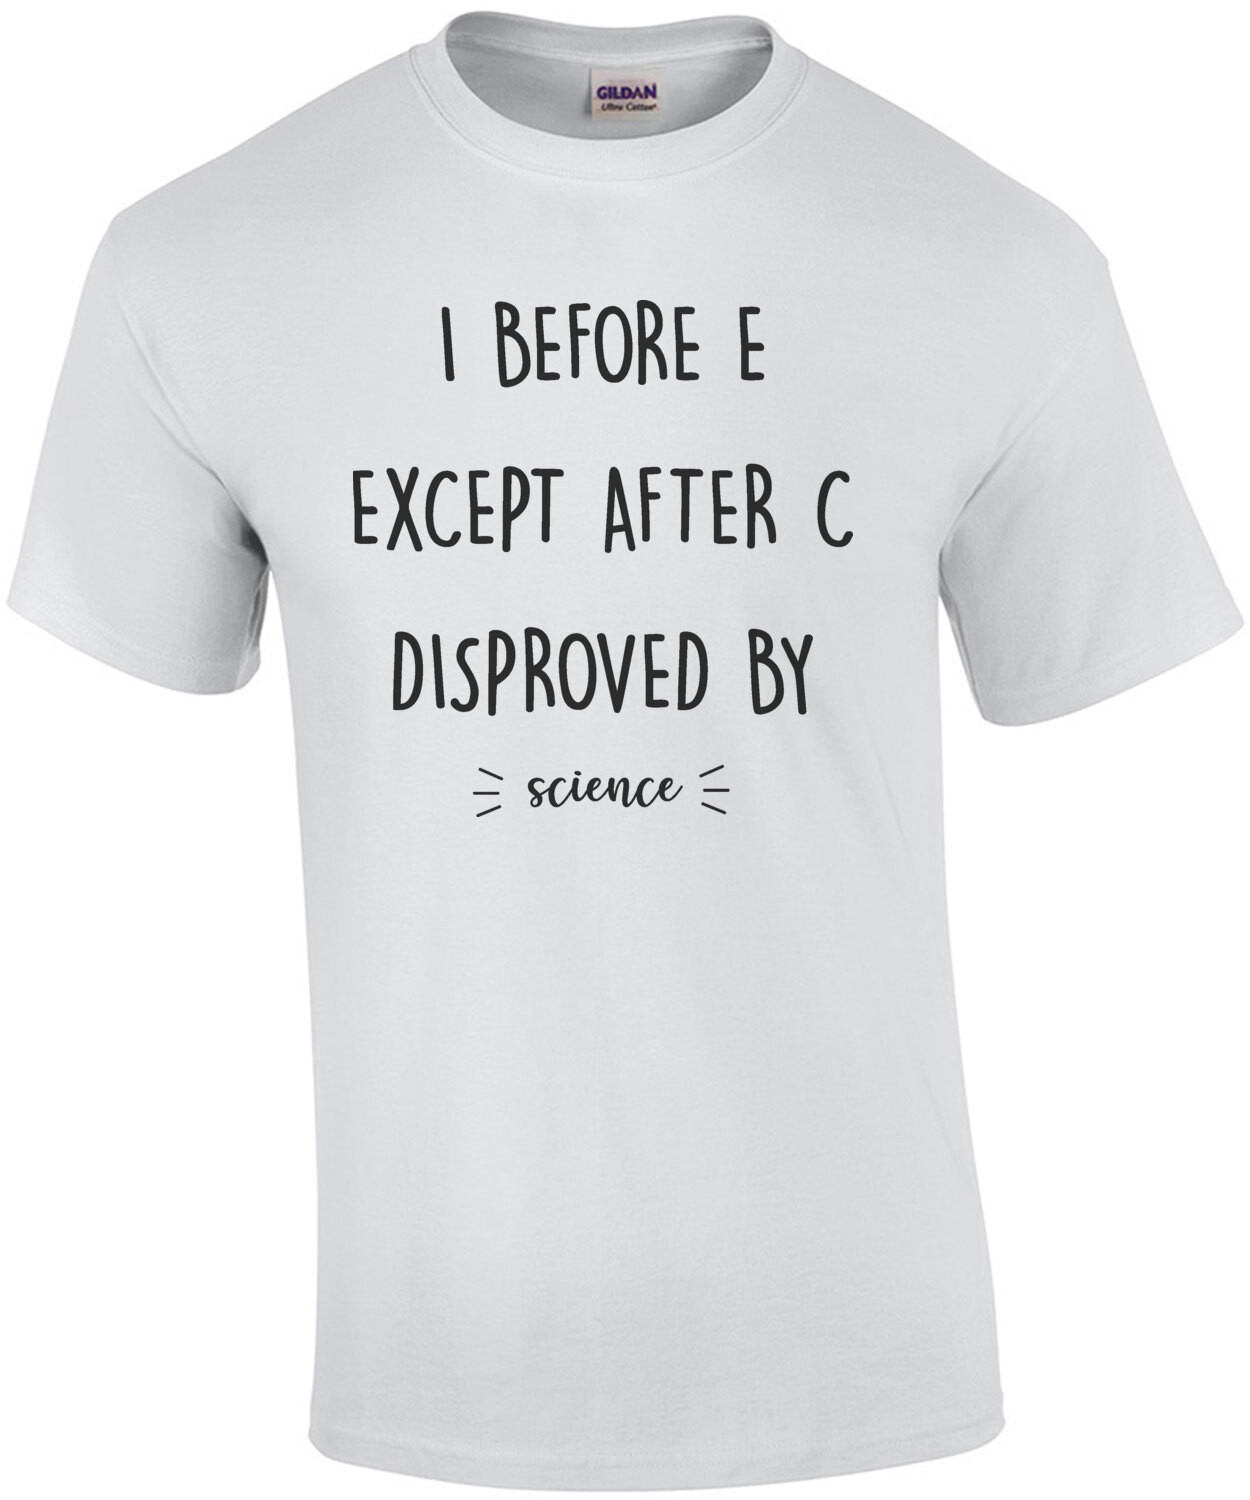 I before E except after C disproved by - science - funny t-shirt